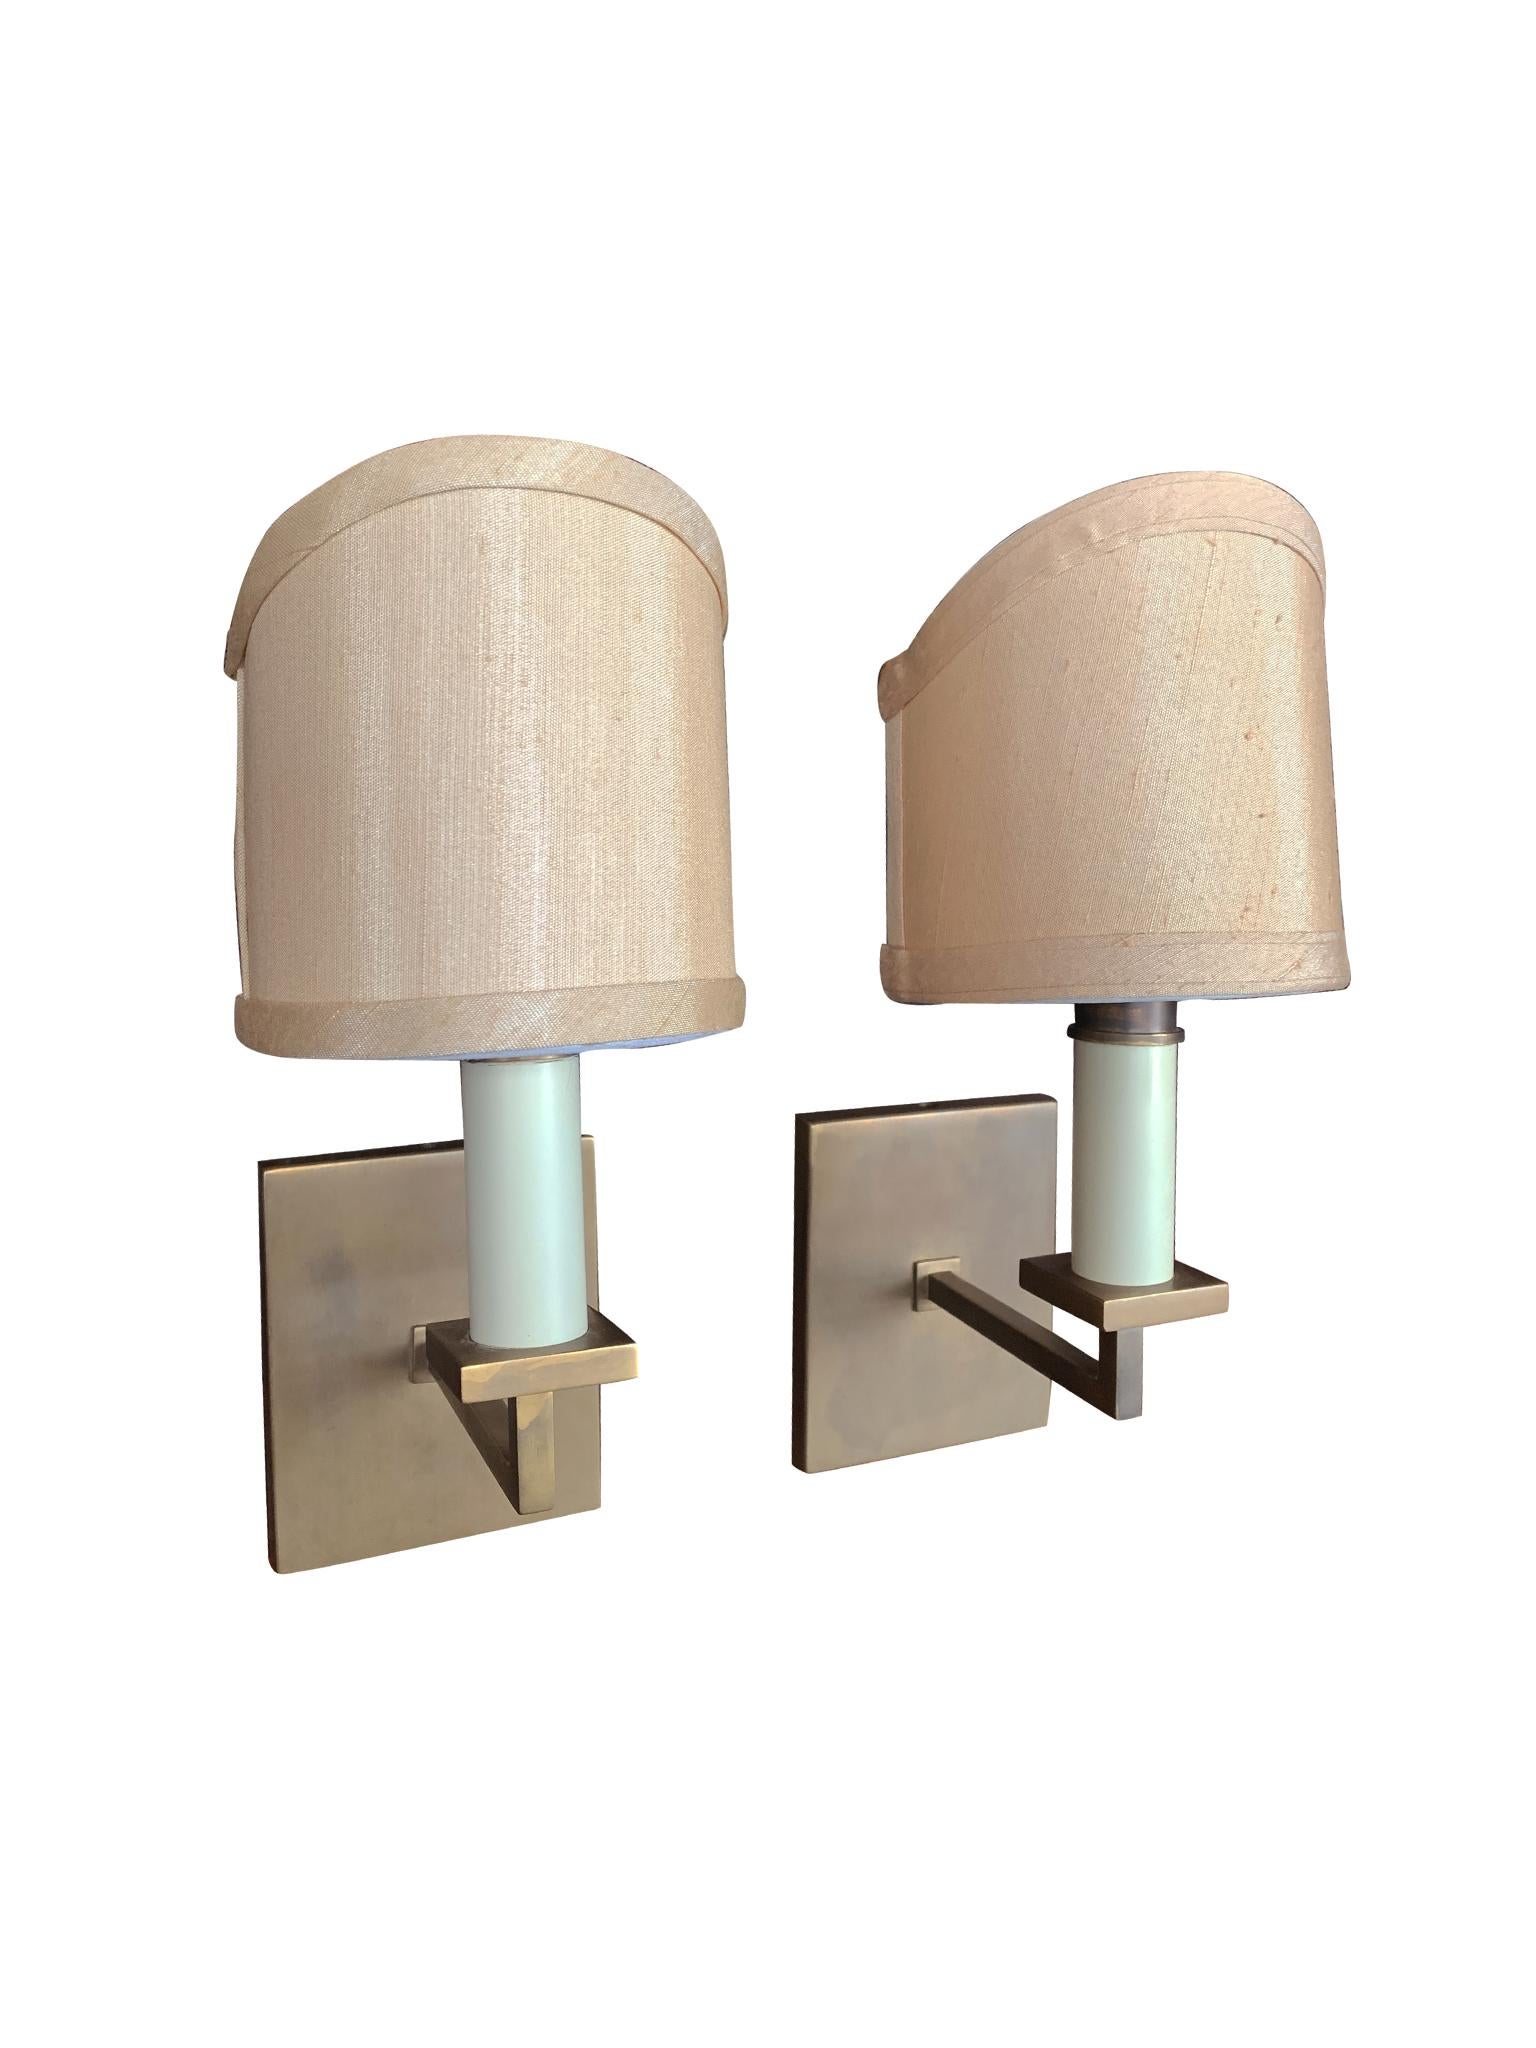 A classic pair of wall sconces made in France in the 1940s. They are brass with candelabra-style sockets. The custom shades are new. They have an elegant shield structure and are comprised of a pale-peach silk with a resin backing. These sconces are